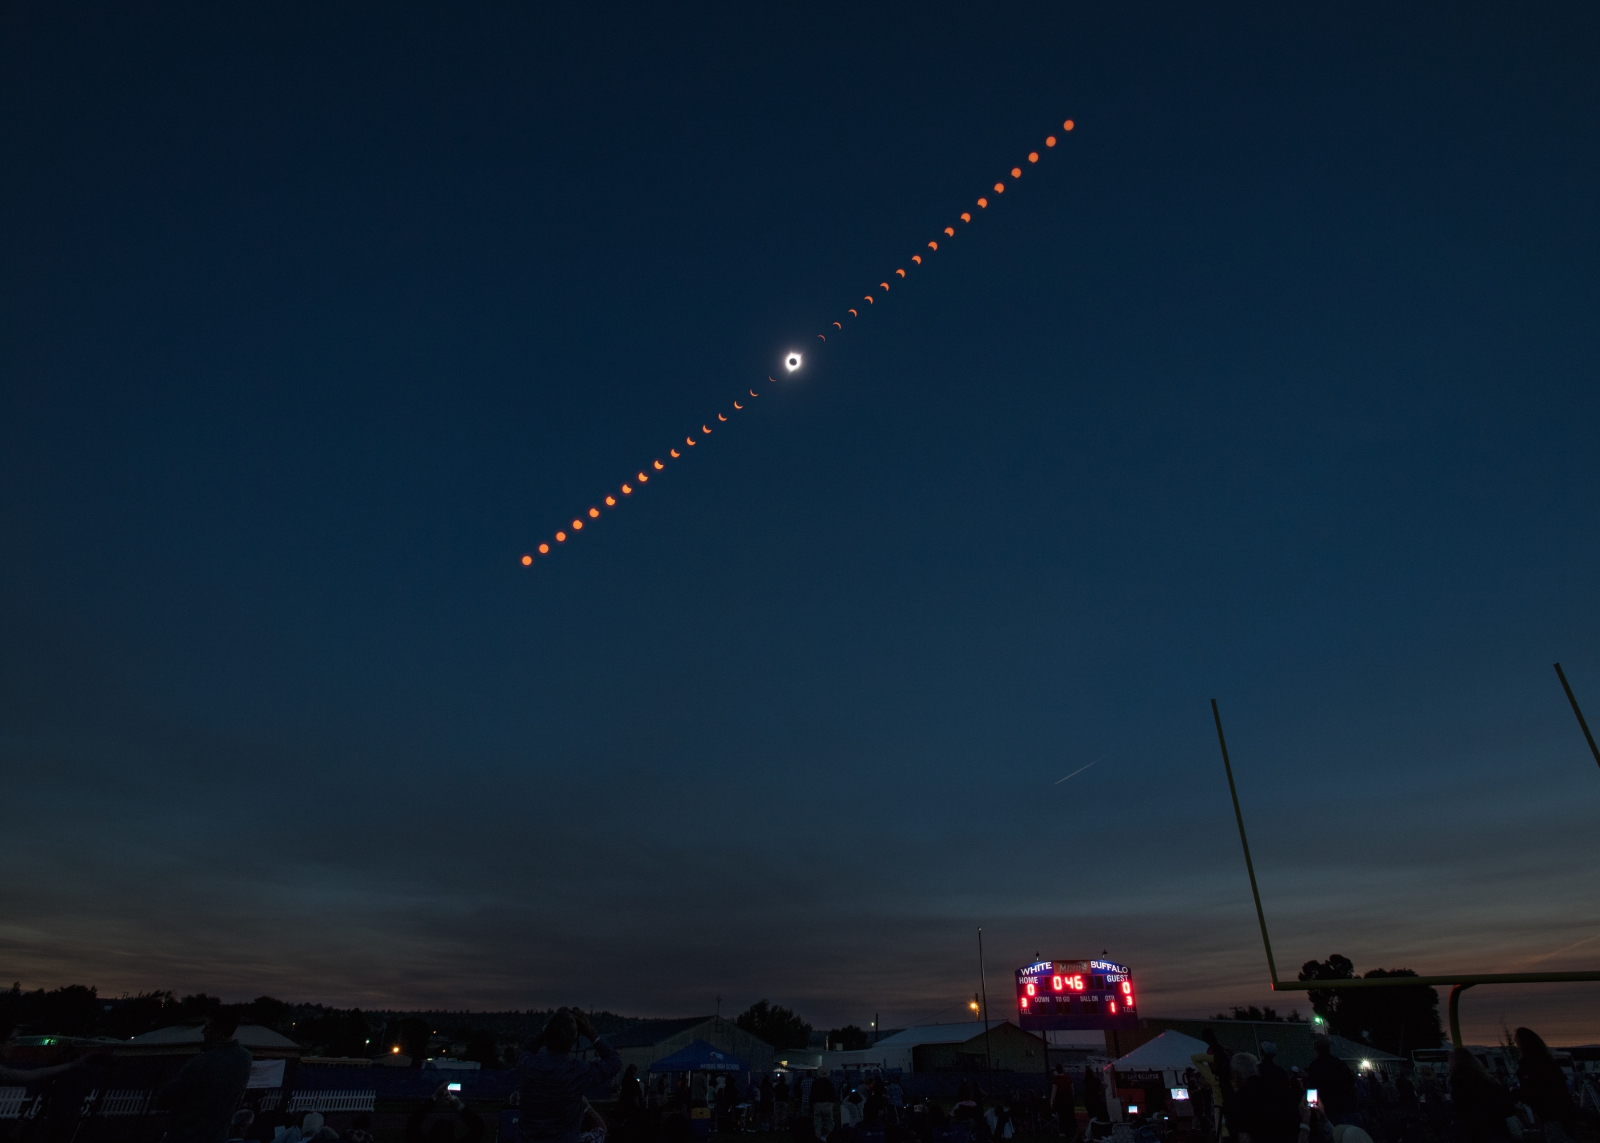 Total Solar Eclipse of August 21, 2017, as seen from Madras, Oregon. Photo by Aubrey Gemignani/NASA.